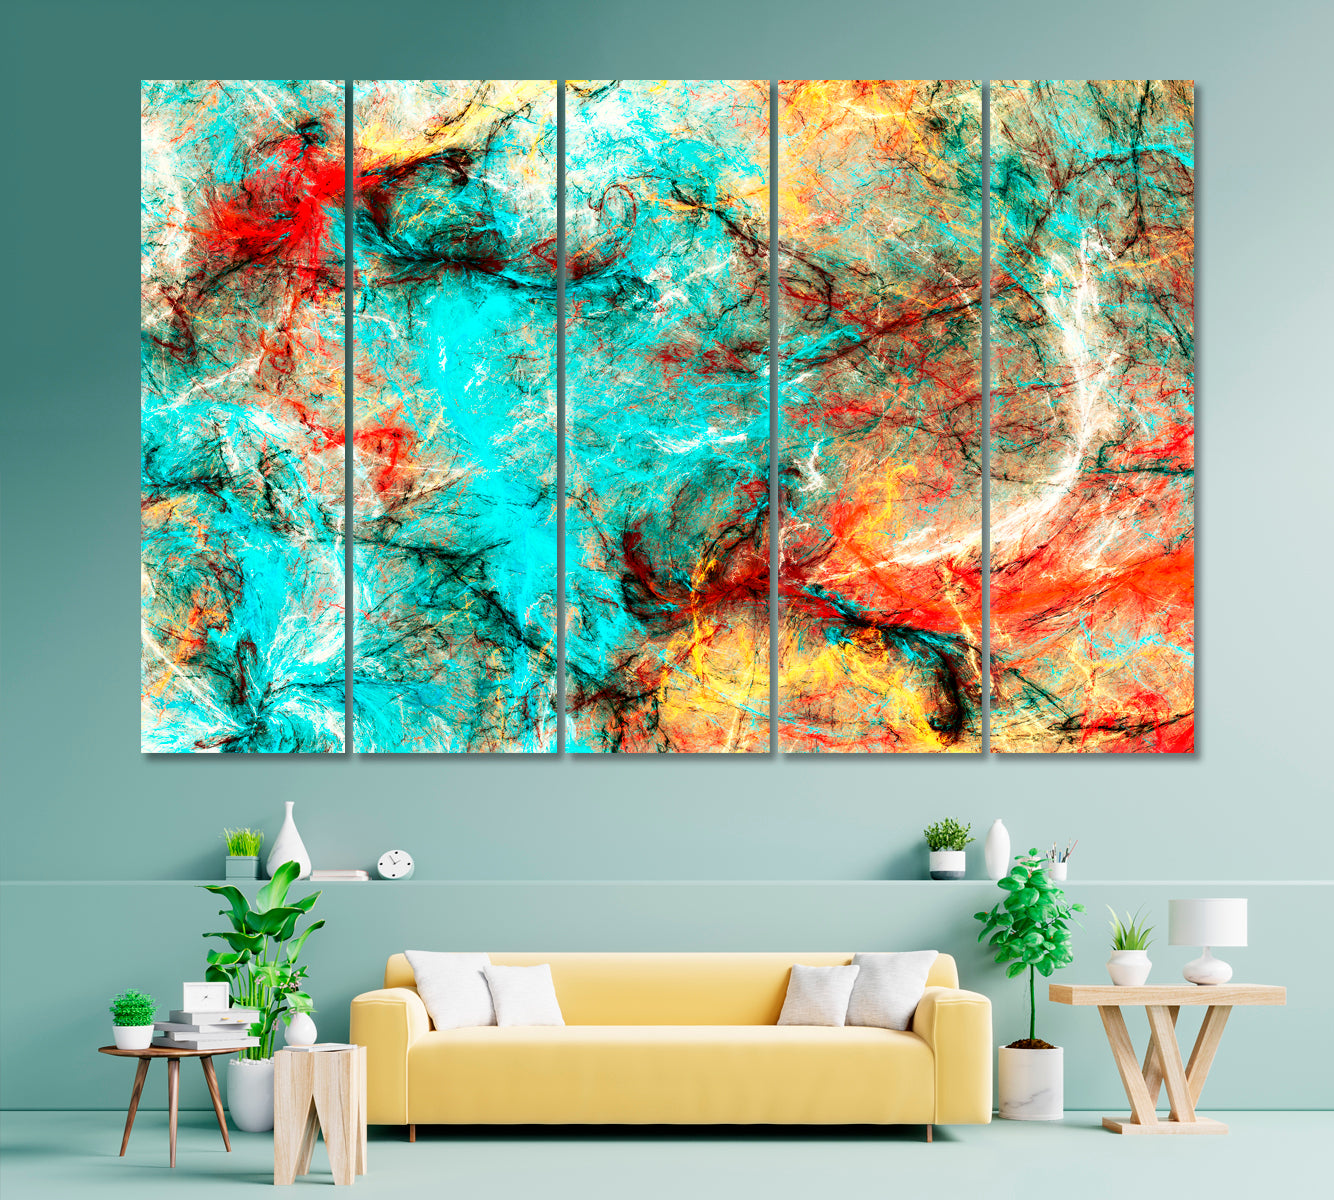 Bright Artistic Splashes Canvas Print ArtLexy 5 Panels 36"x24" inches 